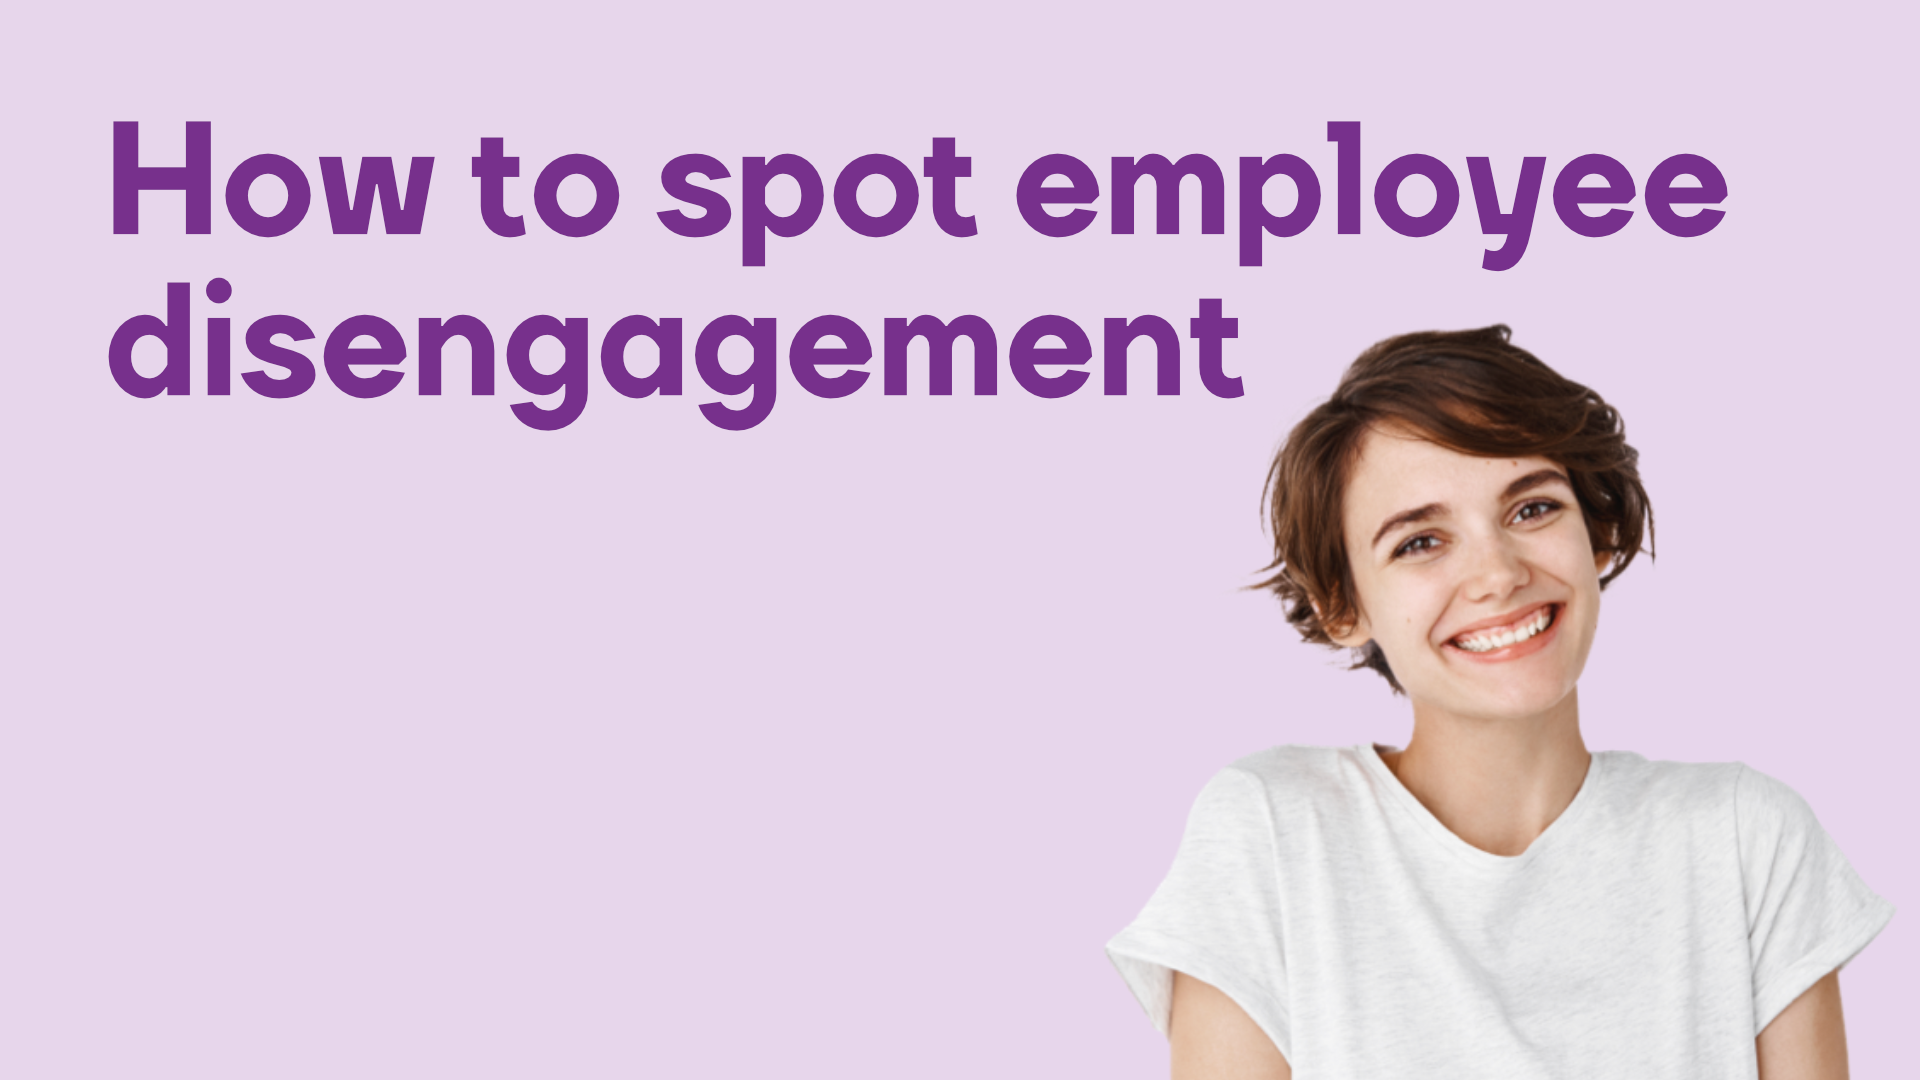 How to tell if an employee is disengaged